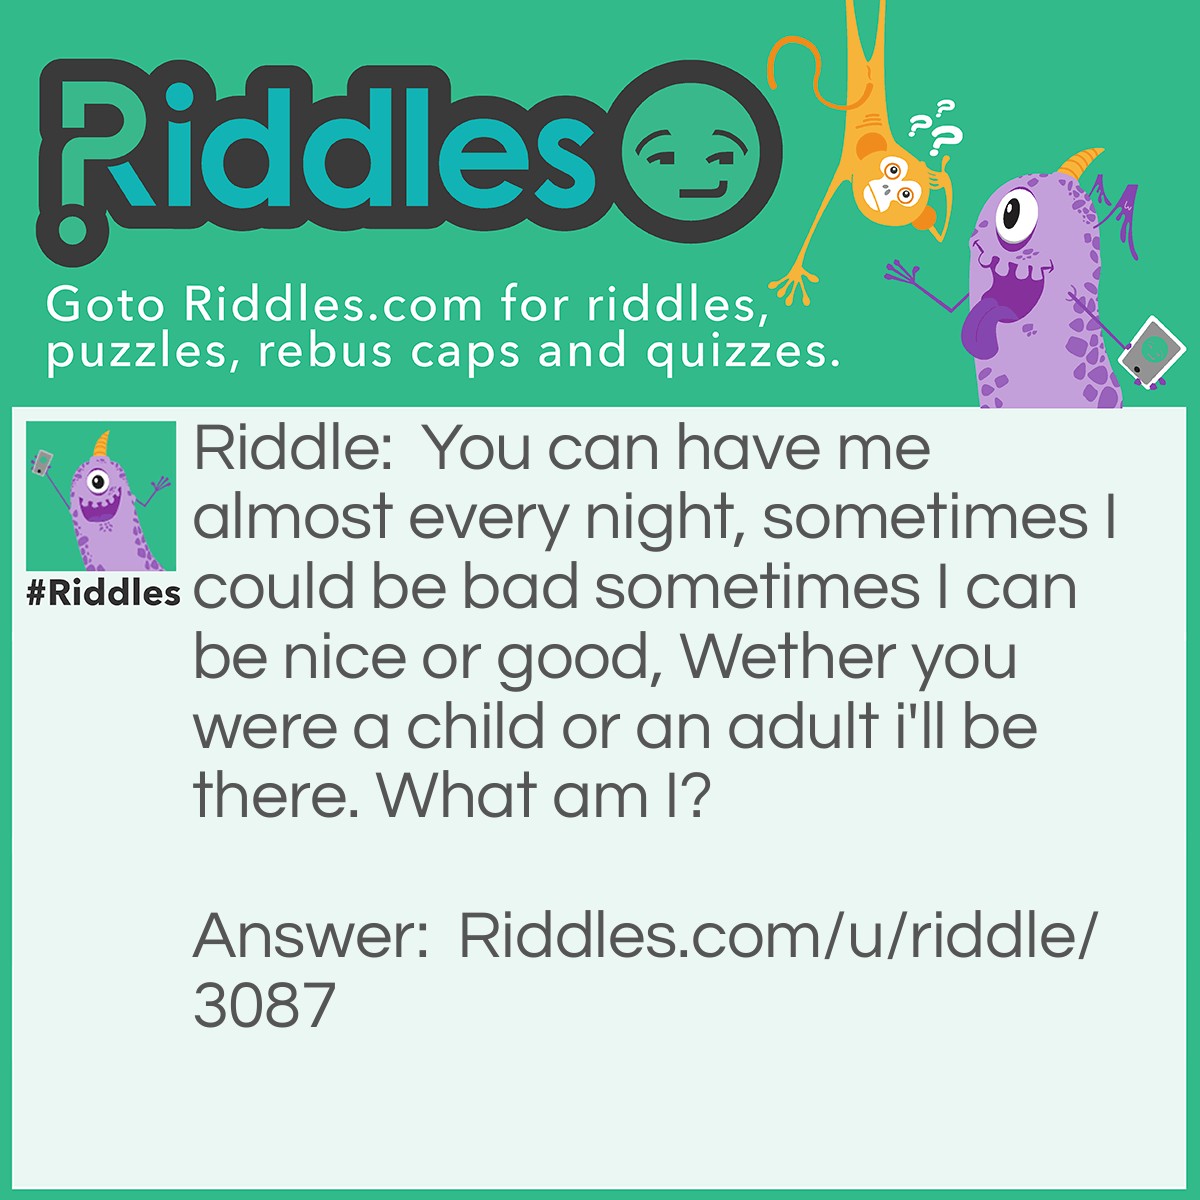 Riddle: You can have me almost every night, sometimes I could be bad sometimes I can be nice or good, Wether you were a child or an adult i'll be there. What am I? Answer: Dreams between (Sweet dreams, Nightmare).